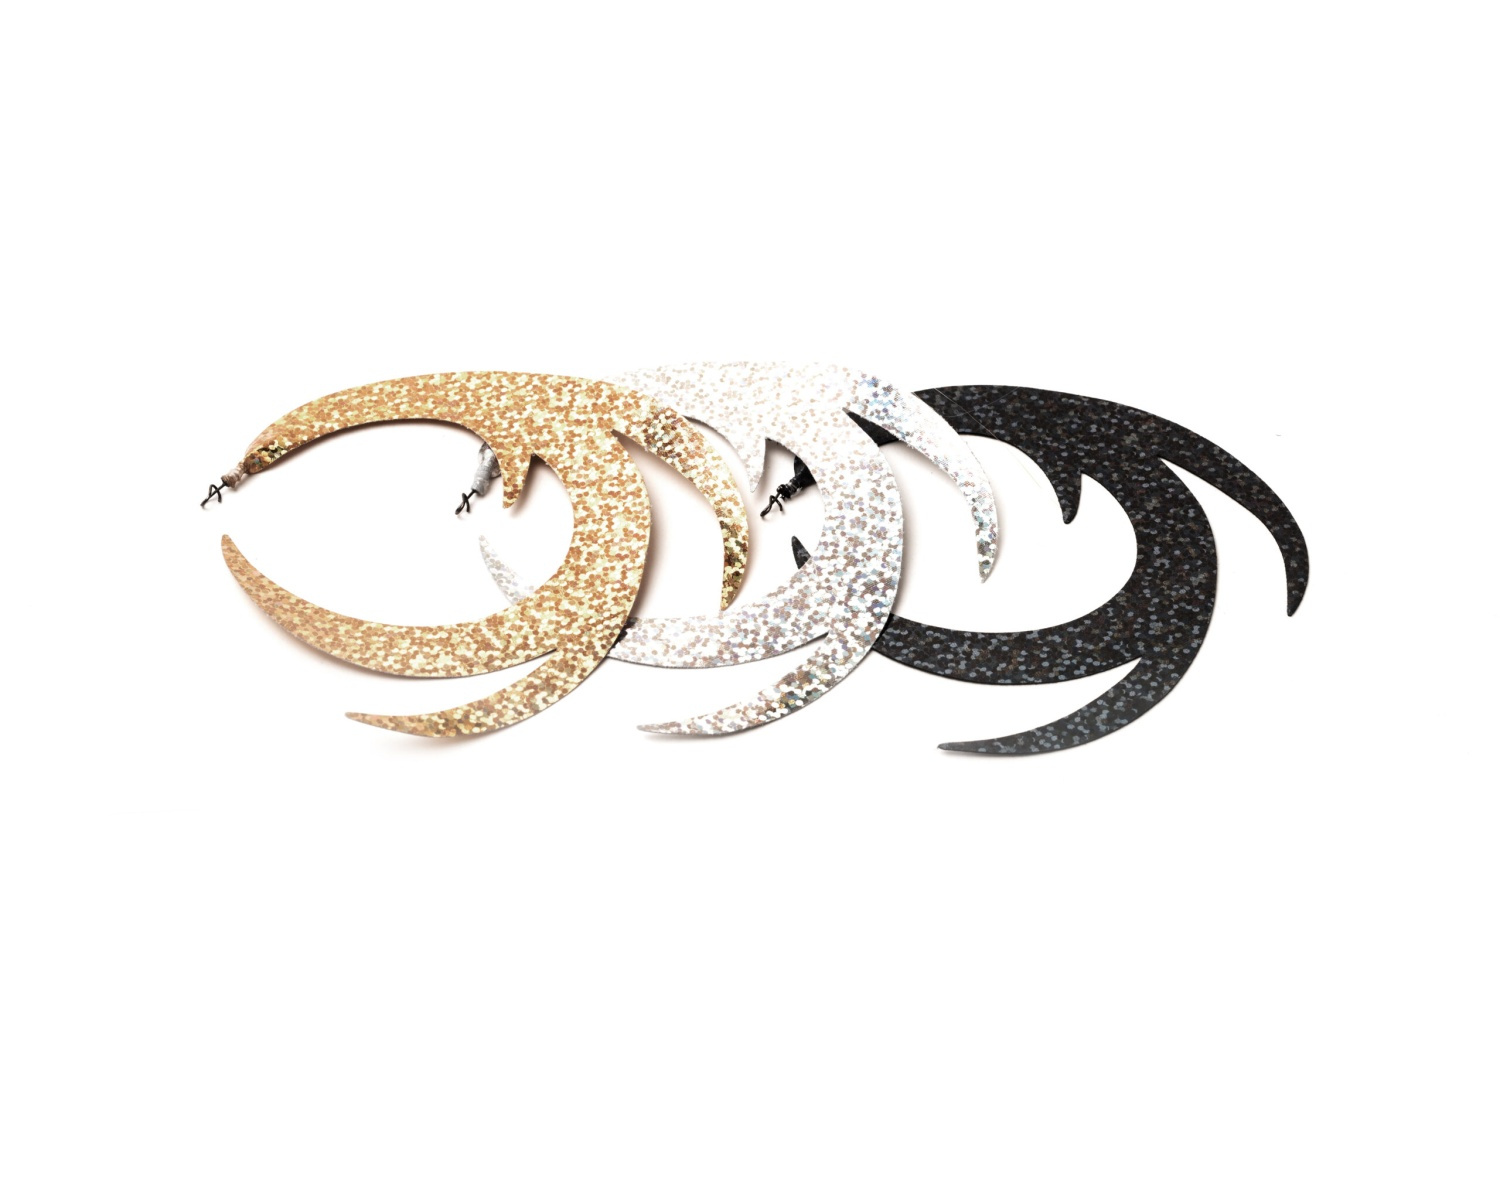 Ready to go Dragontails XL 3-pack Gold/Silver/Black